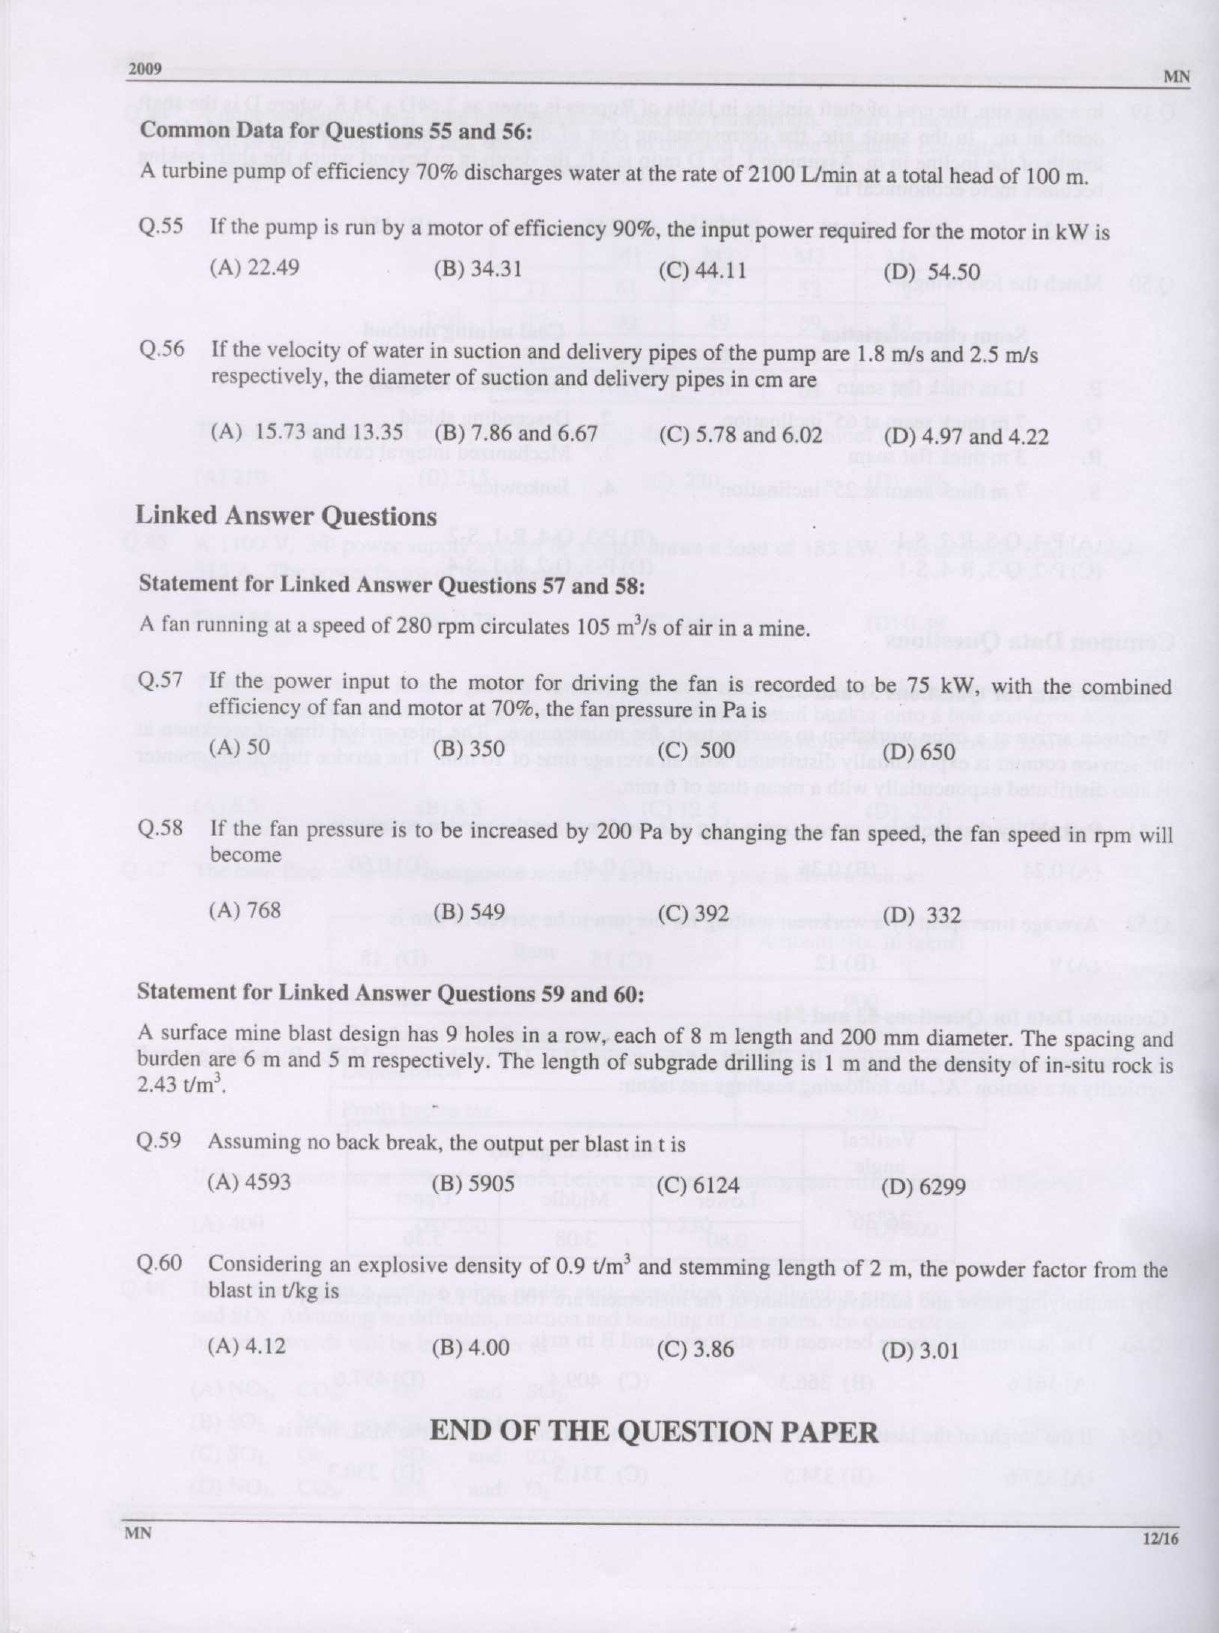 GATE Exam Question Paper 2009 Mining Engineering 12